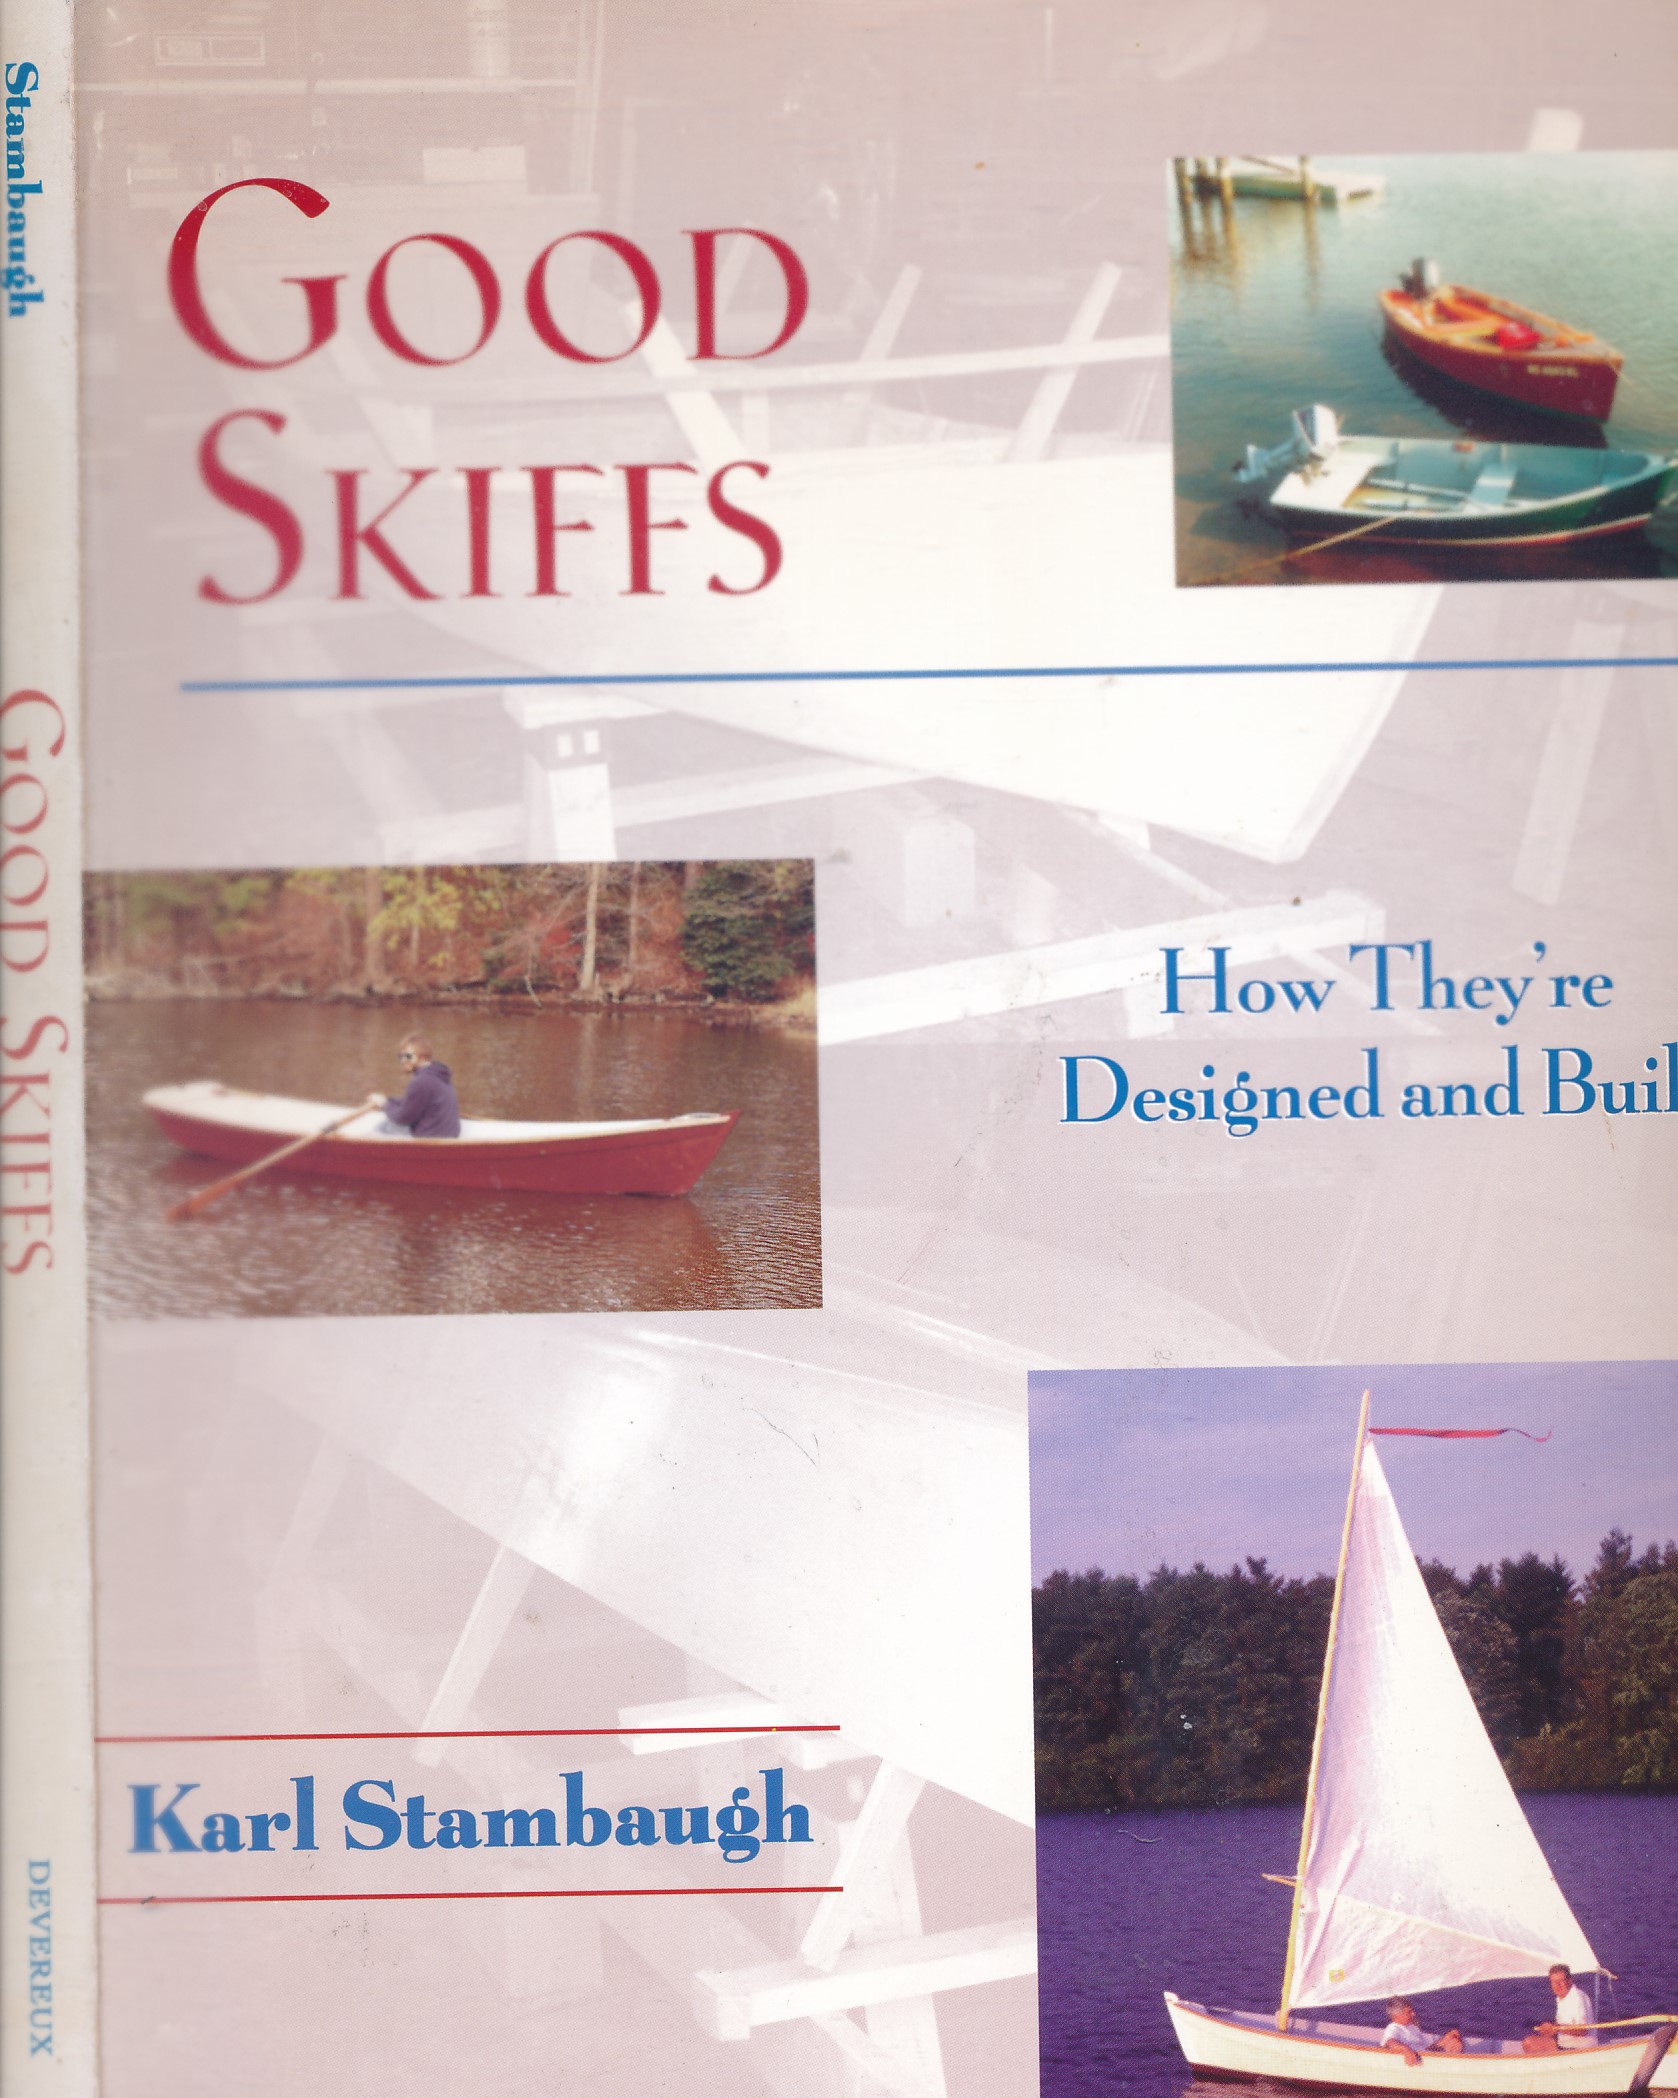 STAMBAUGH, KARL - Good Skiffs. How They'Re Designed and Built